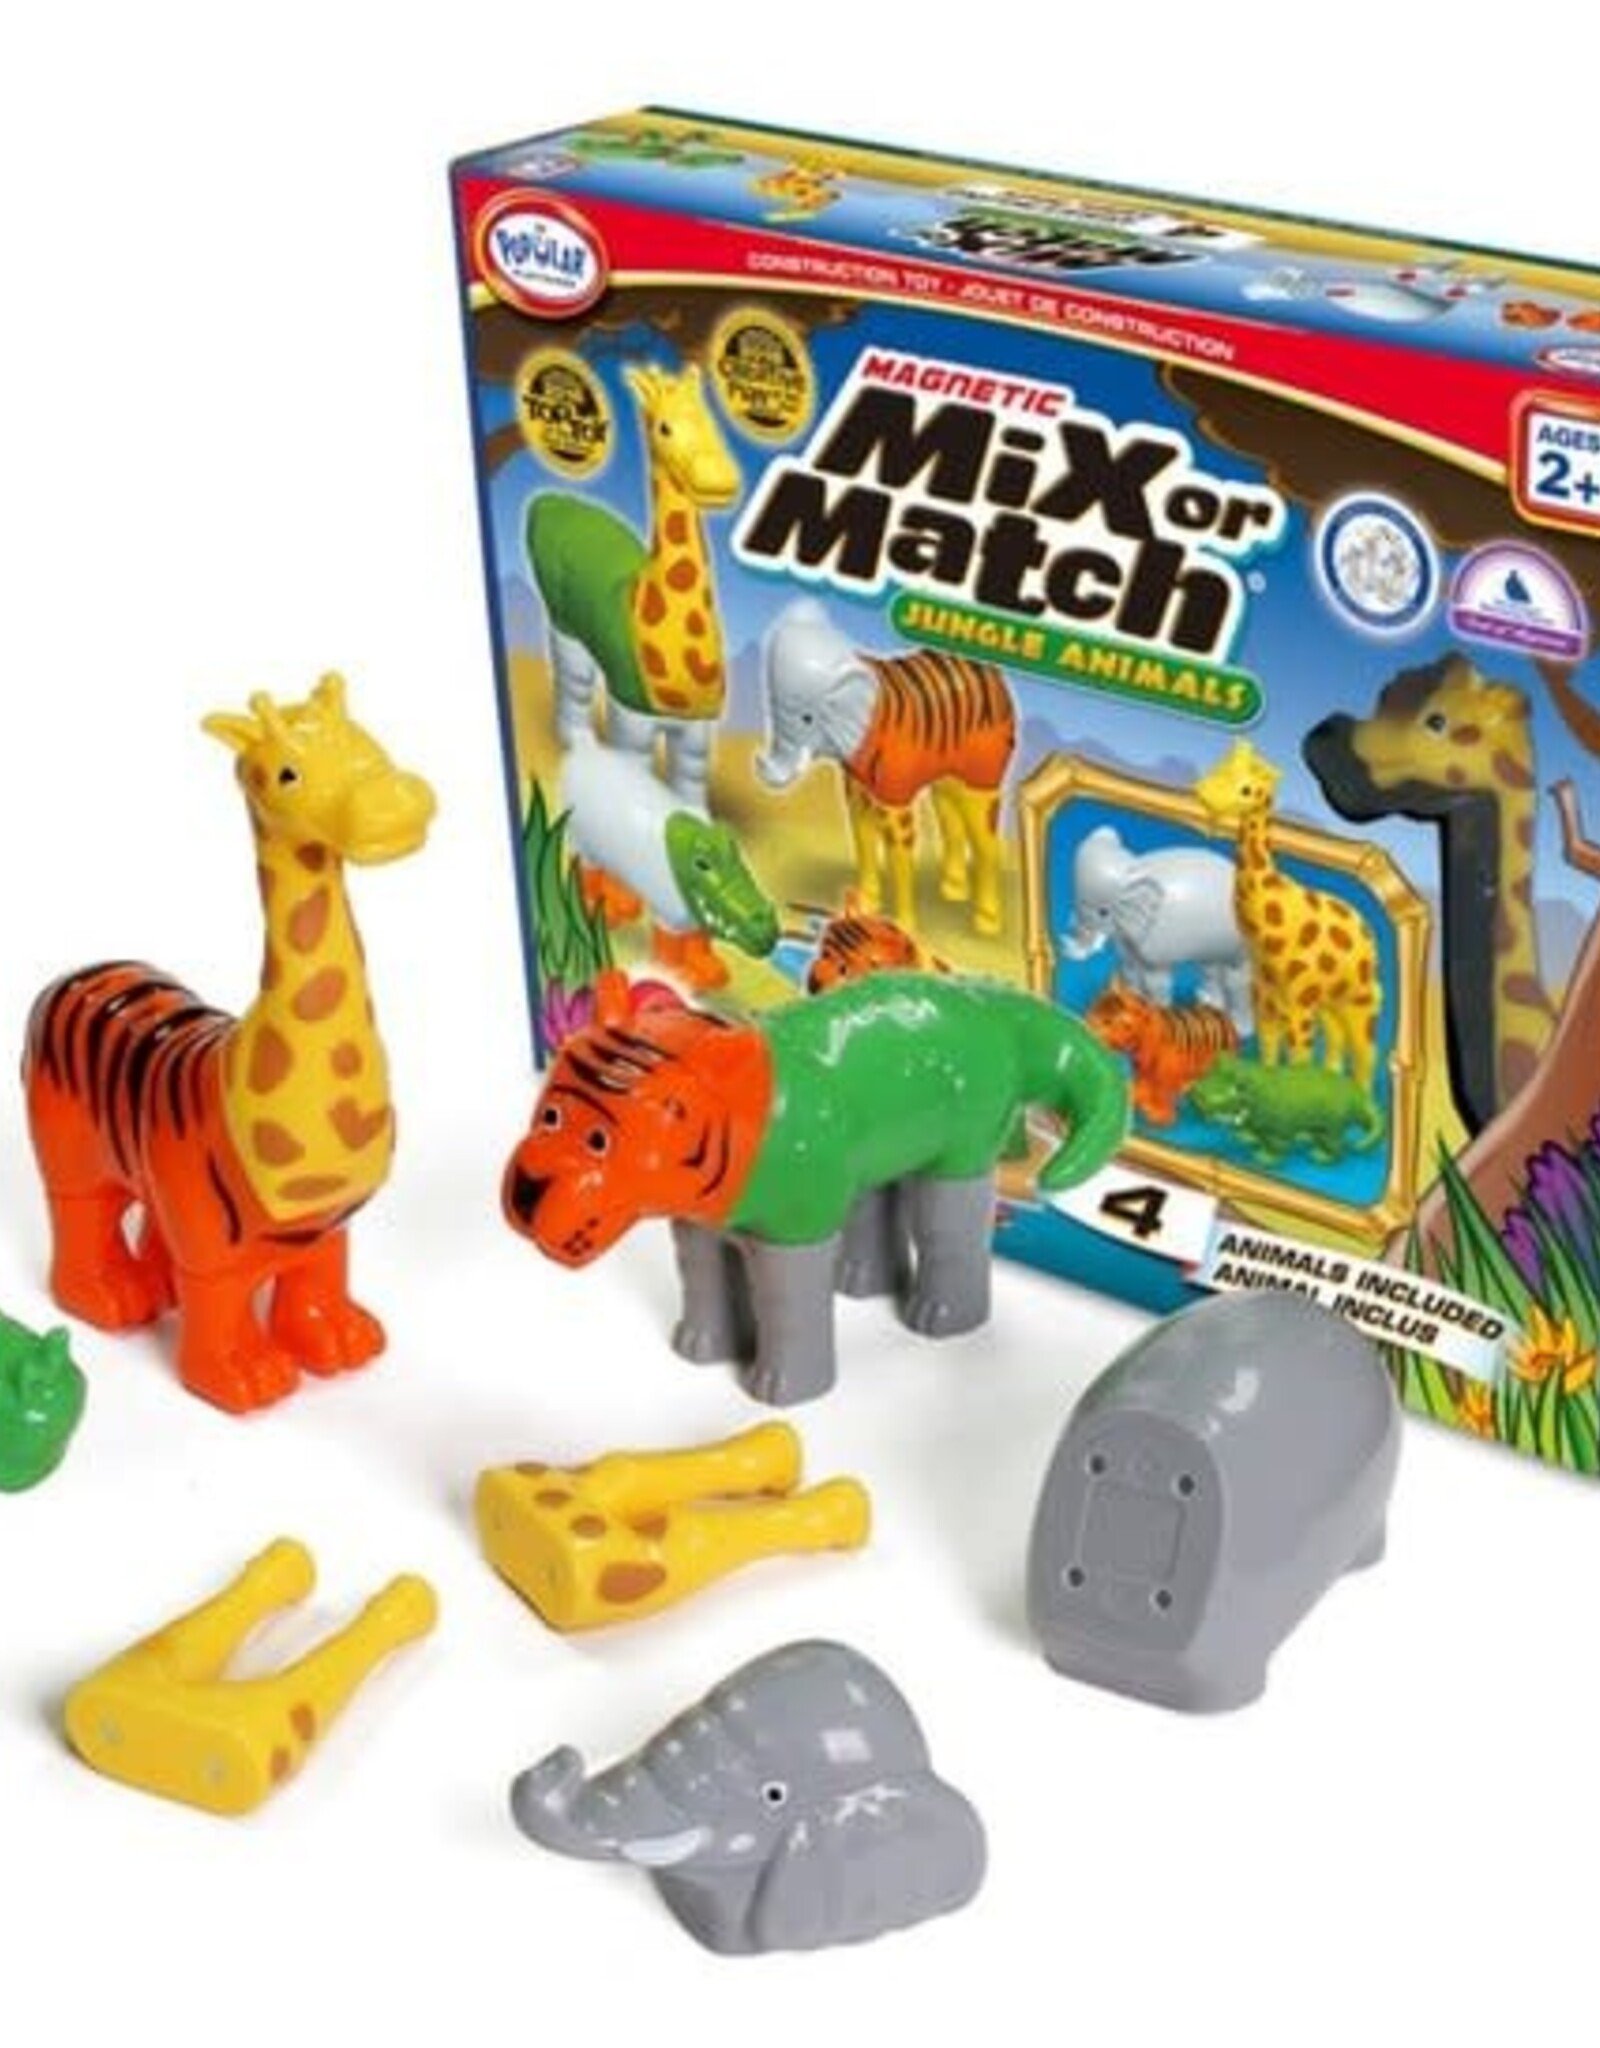 Popular Playthings MAGNETIC MIX OR MATCH ANIMALS - JUNGLE